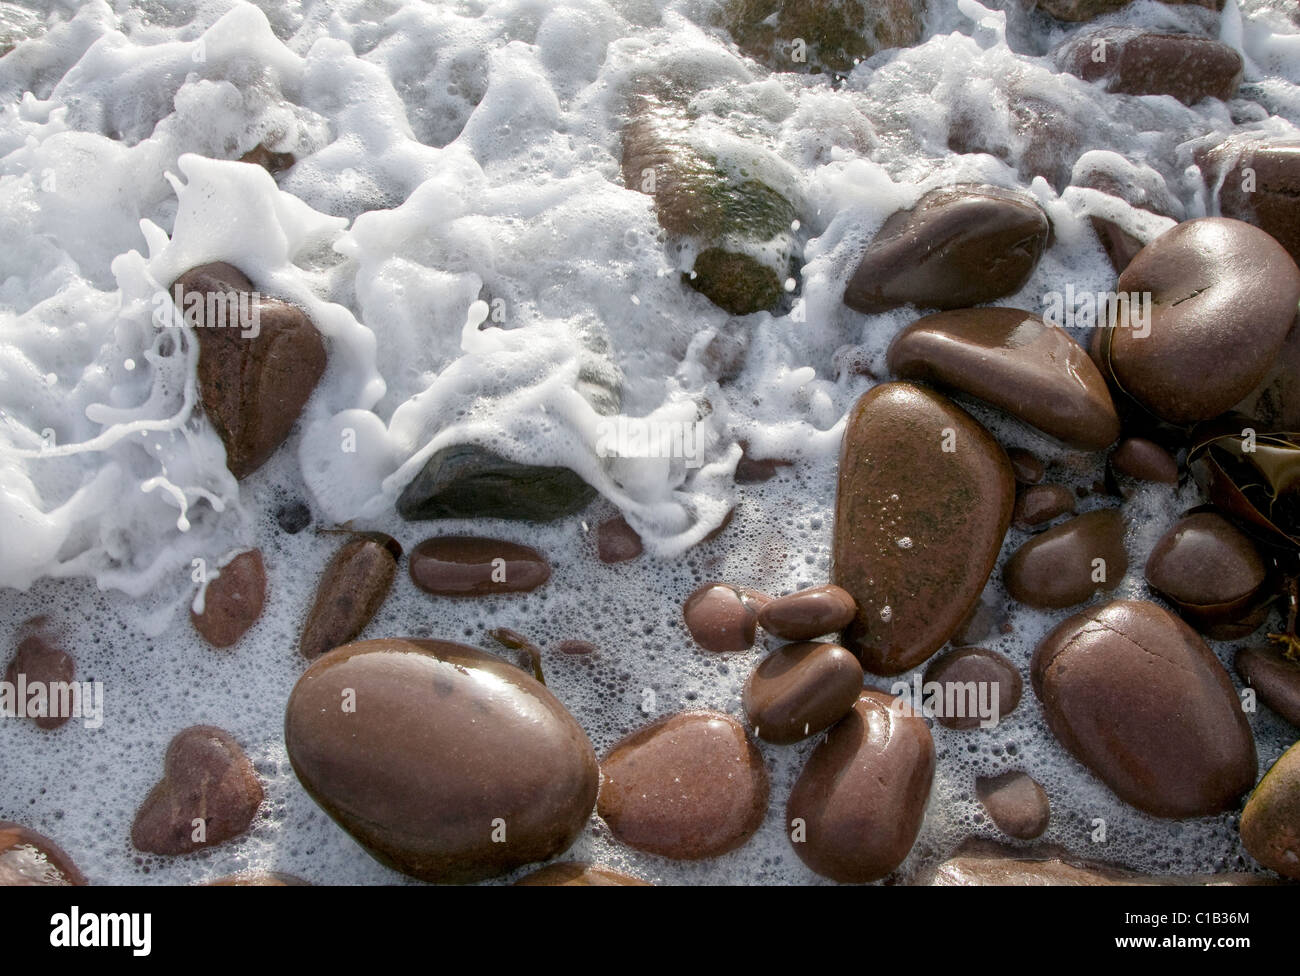 Detail of seawater spume or white foam washing over smooth red pebbles on beach at Applecross, Scottish Highlands Stock Photo